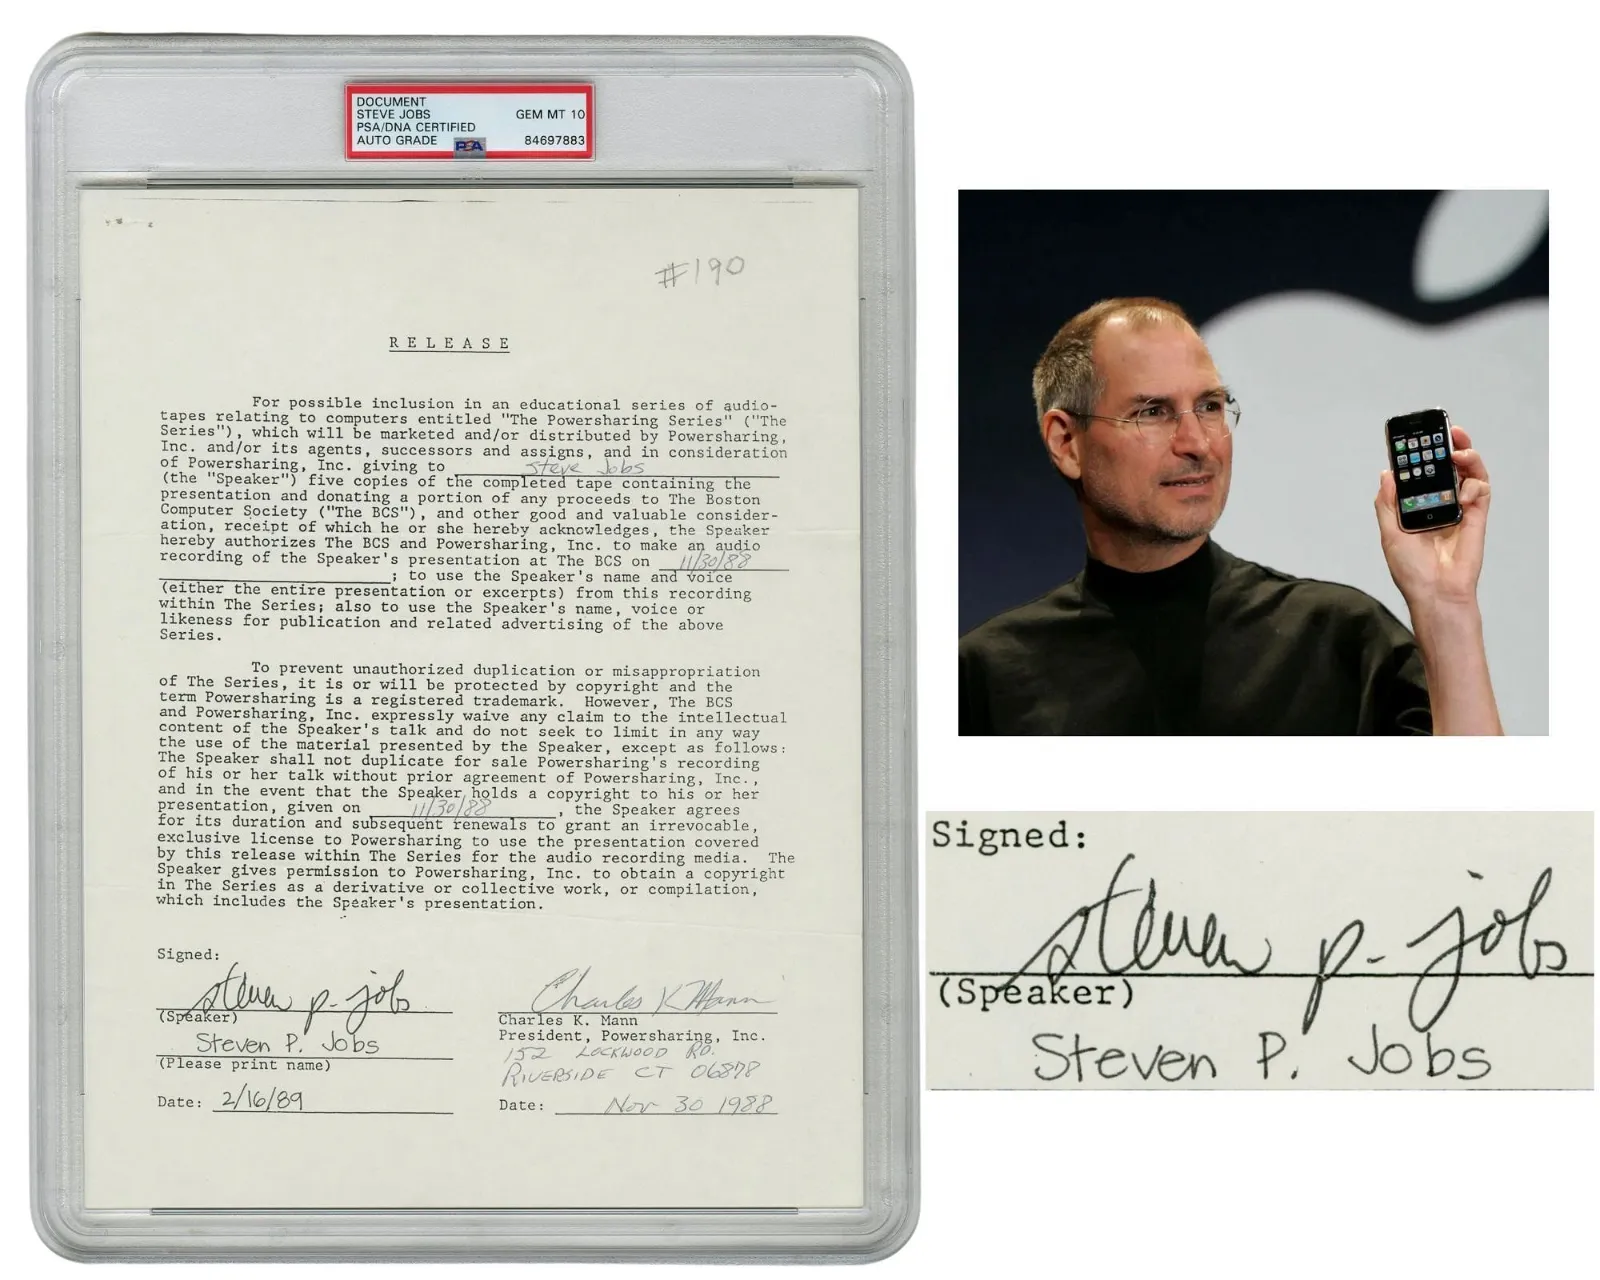 Steve Jobs-signed audio release from a 1988 NeXT computer launch keynote, estimated at $30,000-$40,000 at University Archives.